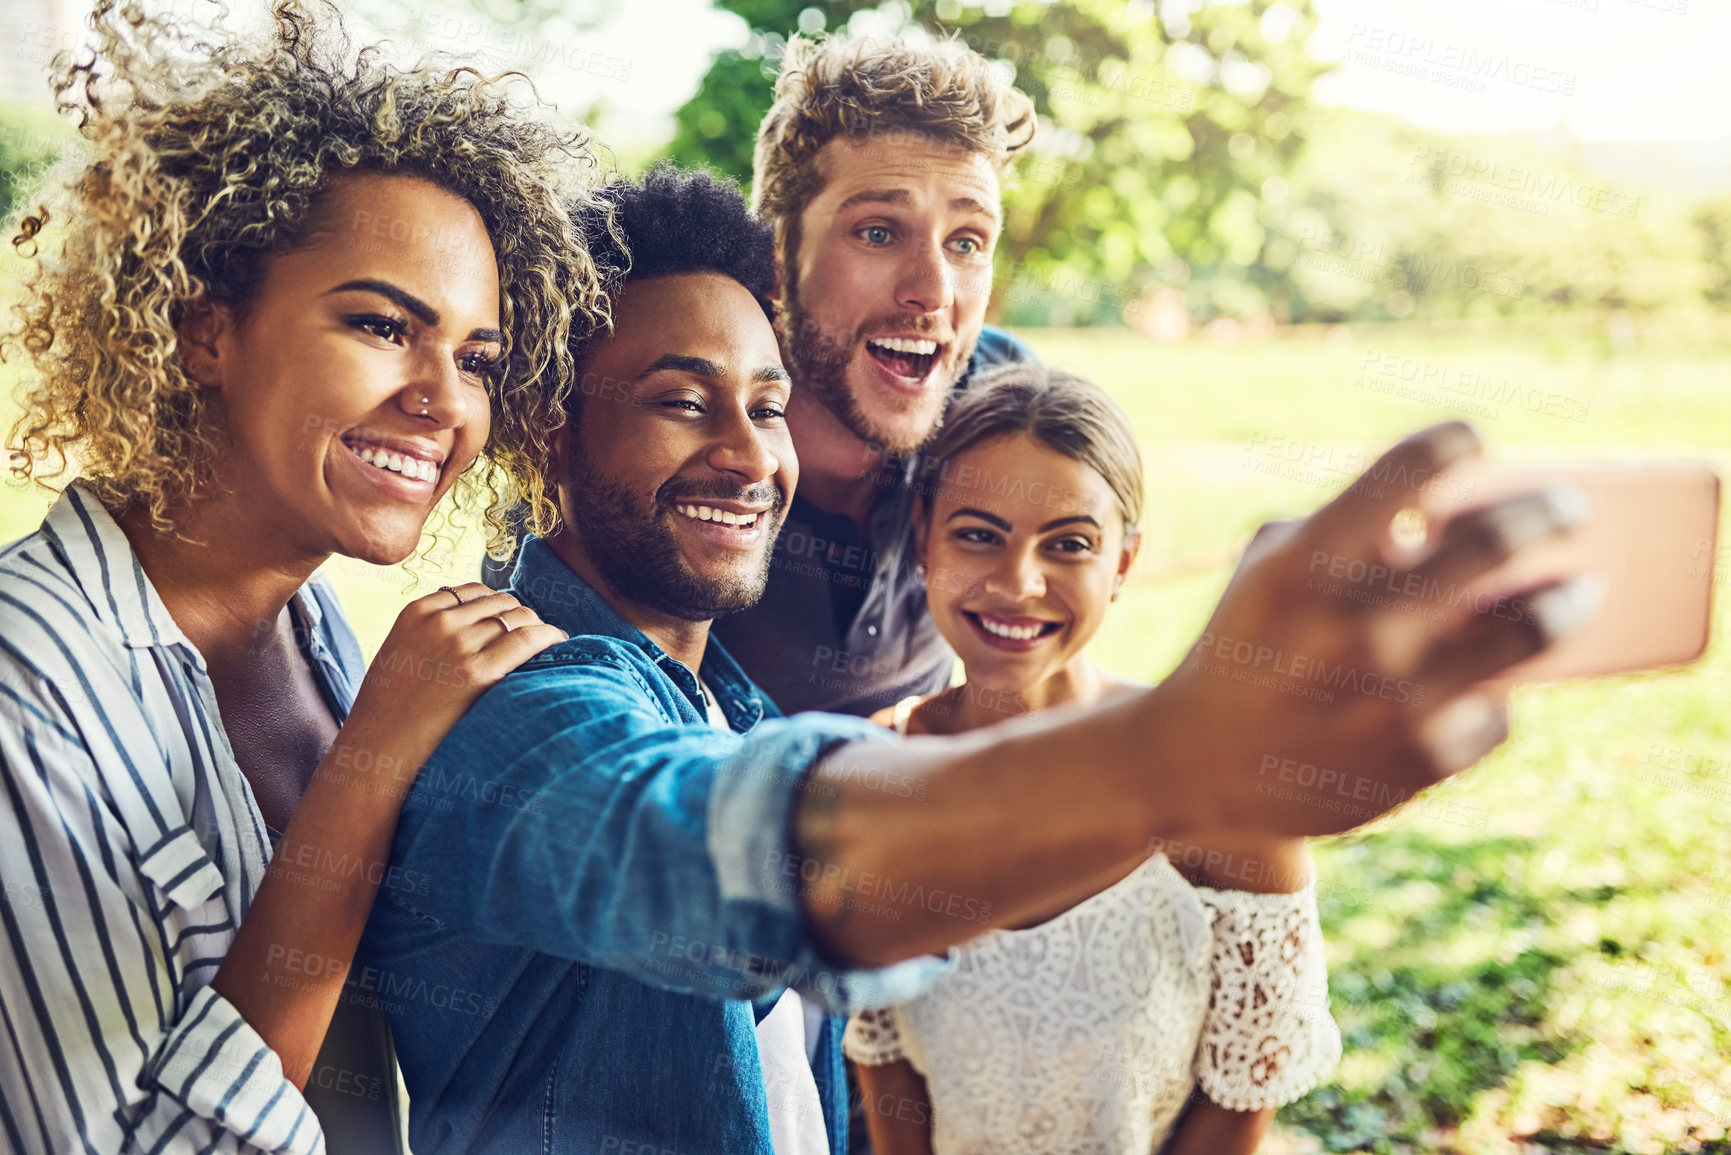 Buy stock photo Shot of a group of friends taking a selfie together outdoors